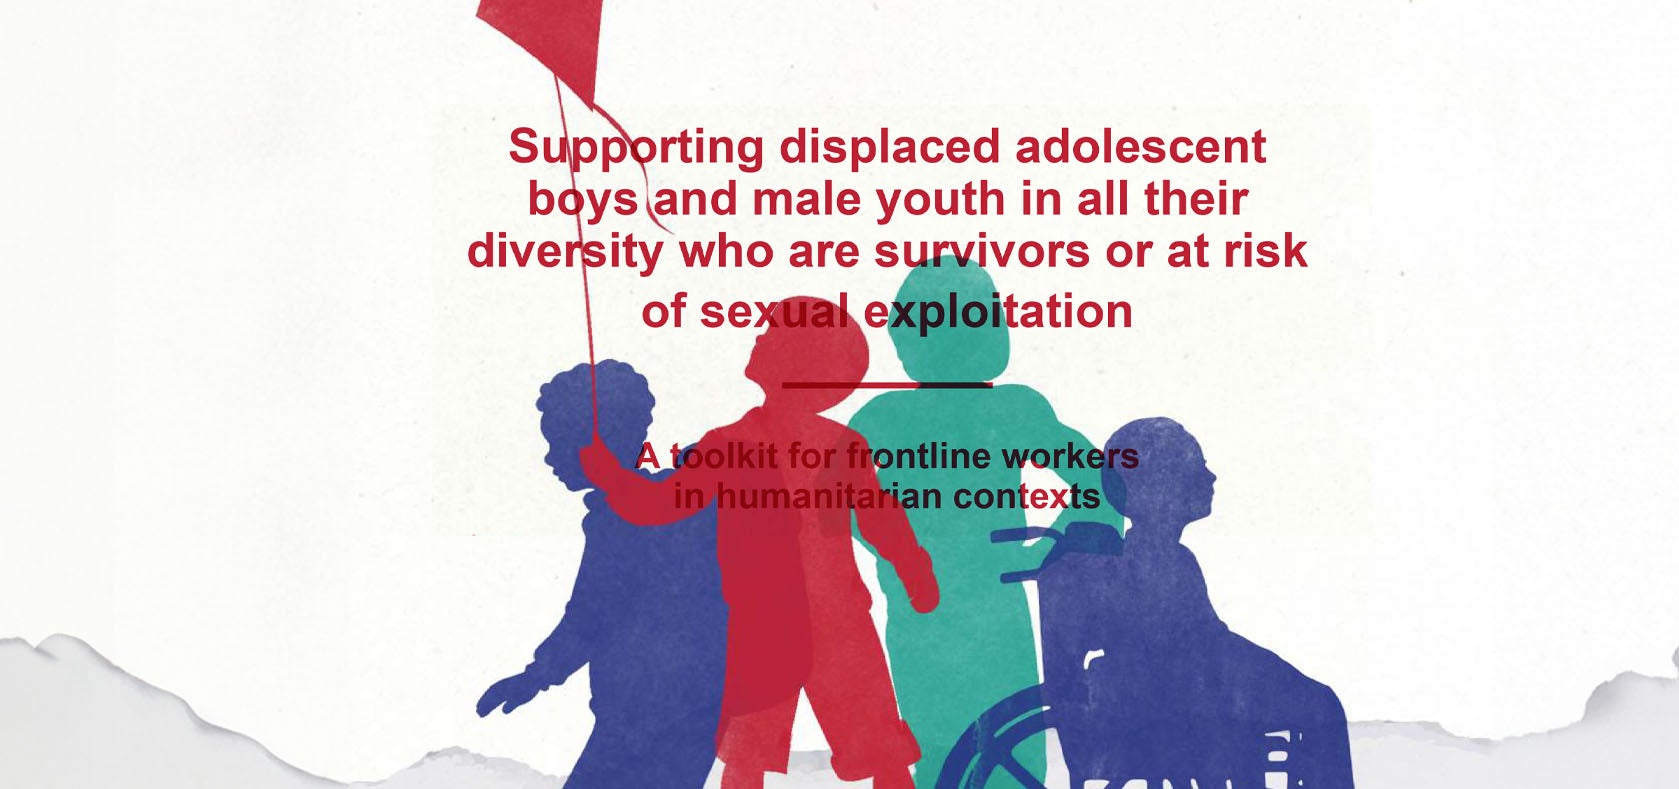 Supporting displaced adolescent boys and male youth in all their diversity who are survivors or at risk of sexual exploitation: A toolkit for frontline workers in humanitarian contexts